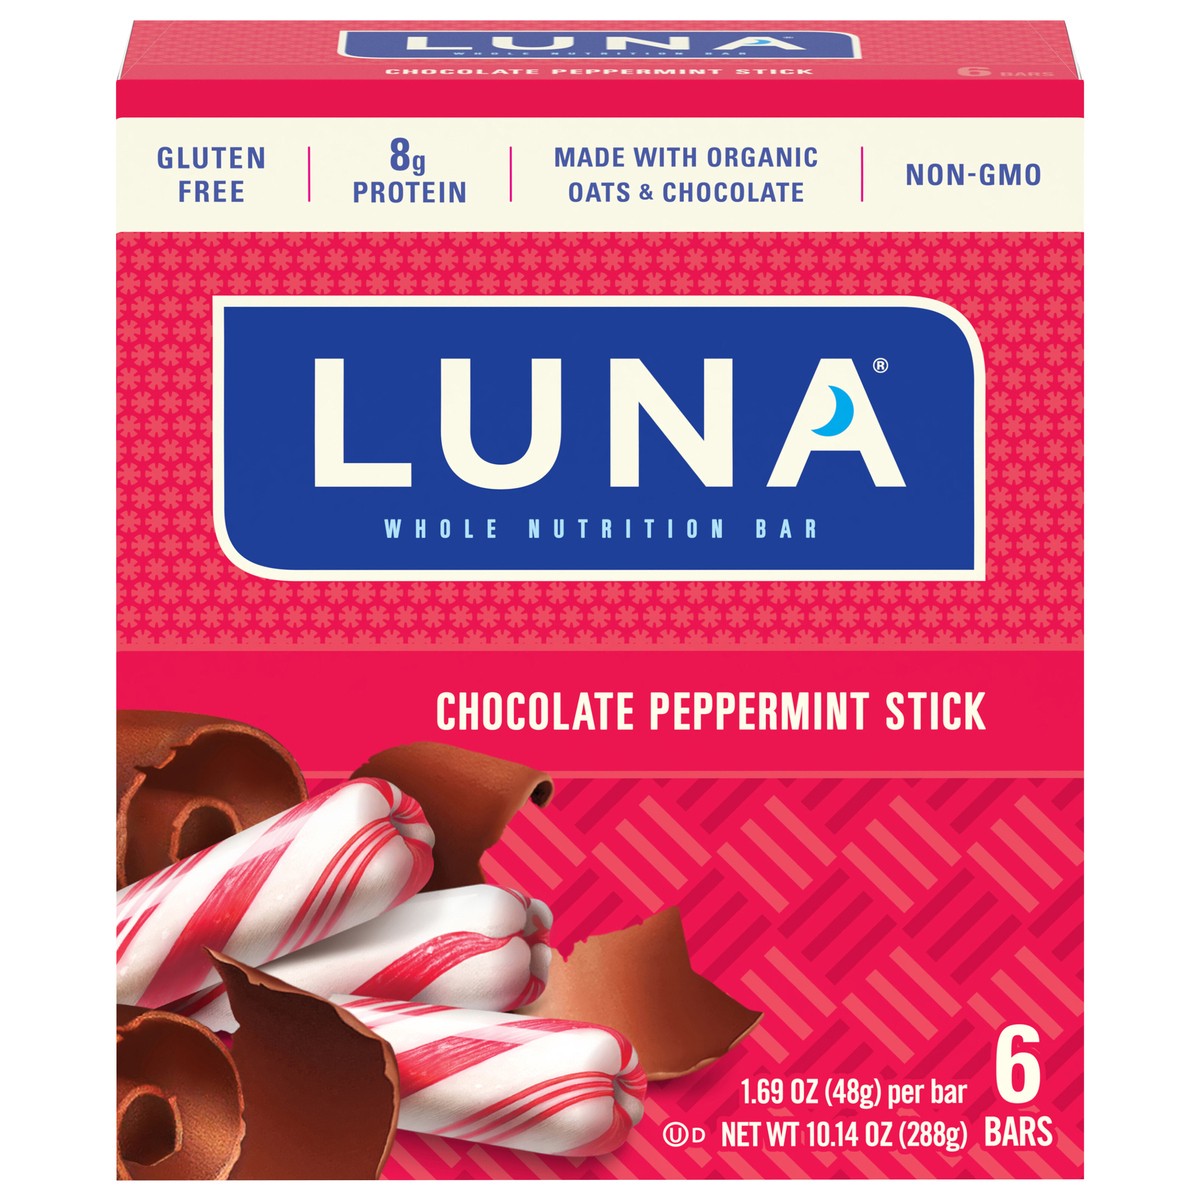 slide 1 of 6, LUNA Bar - Chocolate Peppermint Stick - Gluten-Free - Non-GMO - 7-9g Protein - Made with Organic Oats - Low Glycemic - Whole Nutrition Snack Bars - 1.69 oz. (6 Pack), 10.14 oz